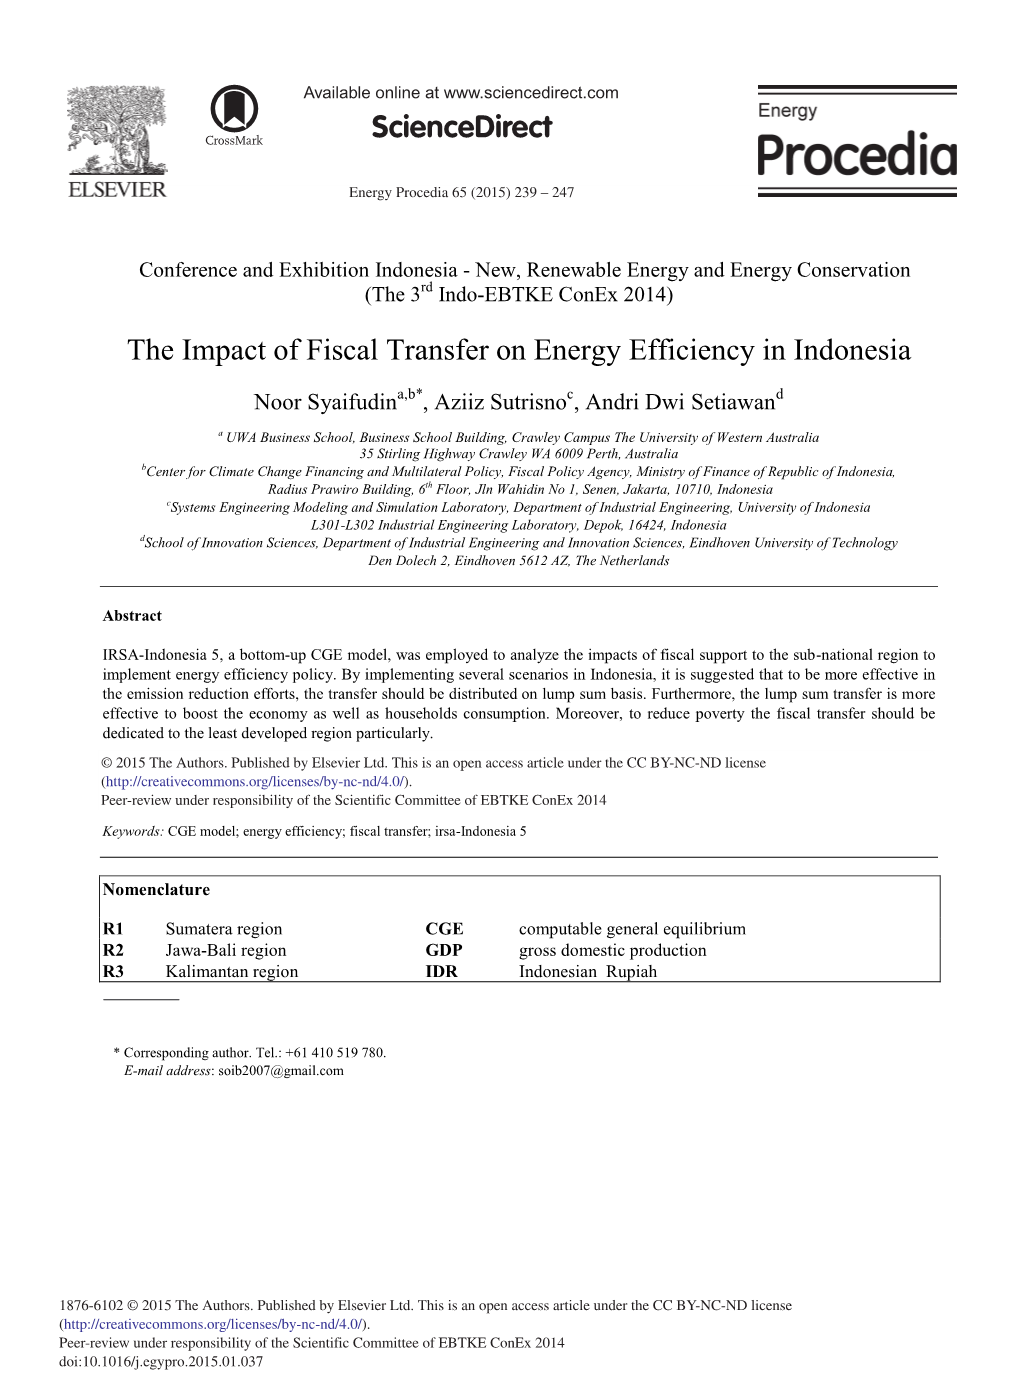 The Impact of Fiscal Transfer on Energy Efficiency in Indonesia